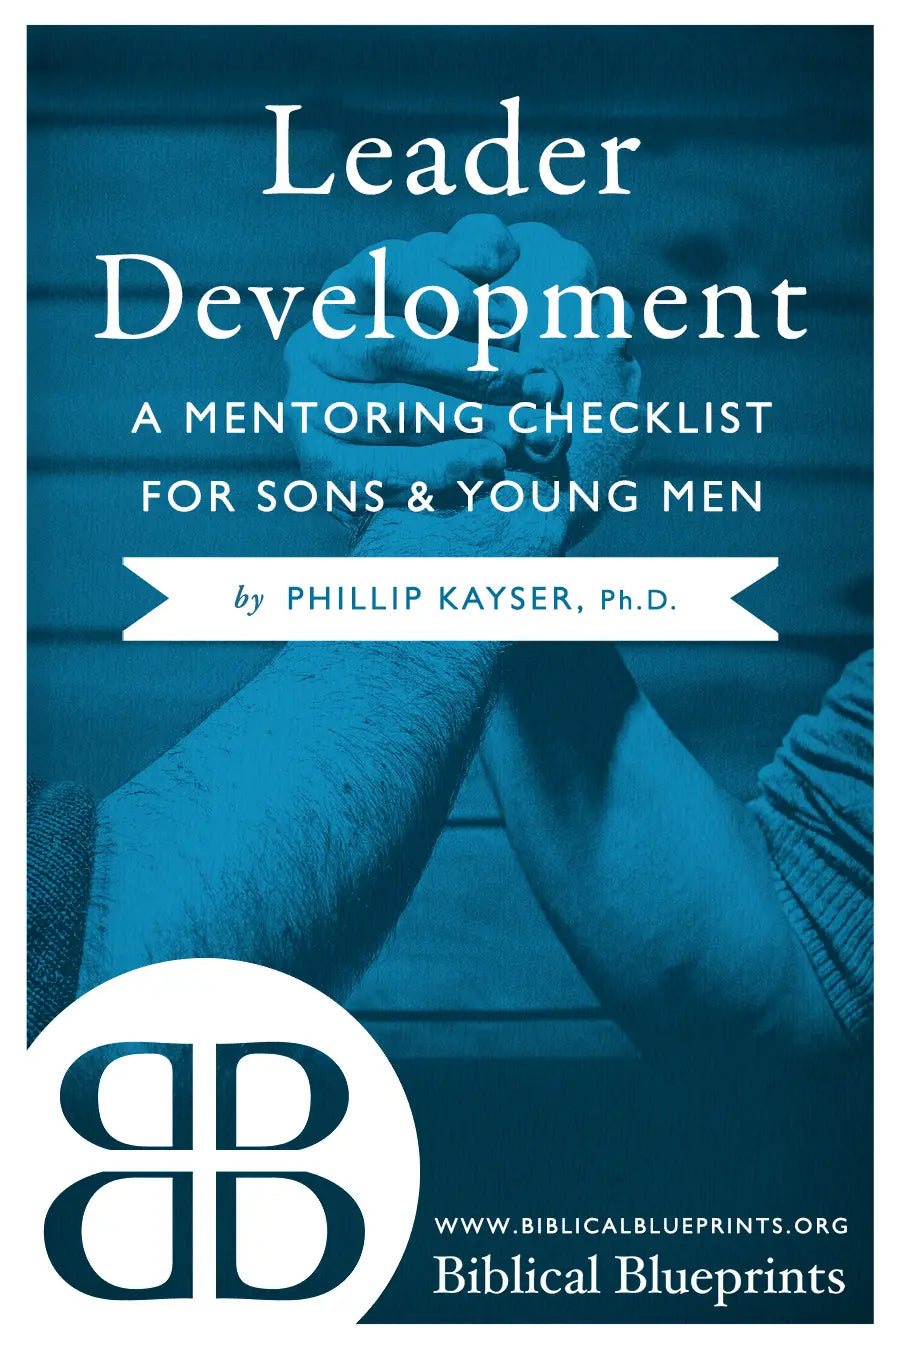 Leader Development: A Mentoring Checklist for Sons and Young Men